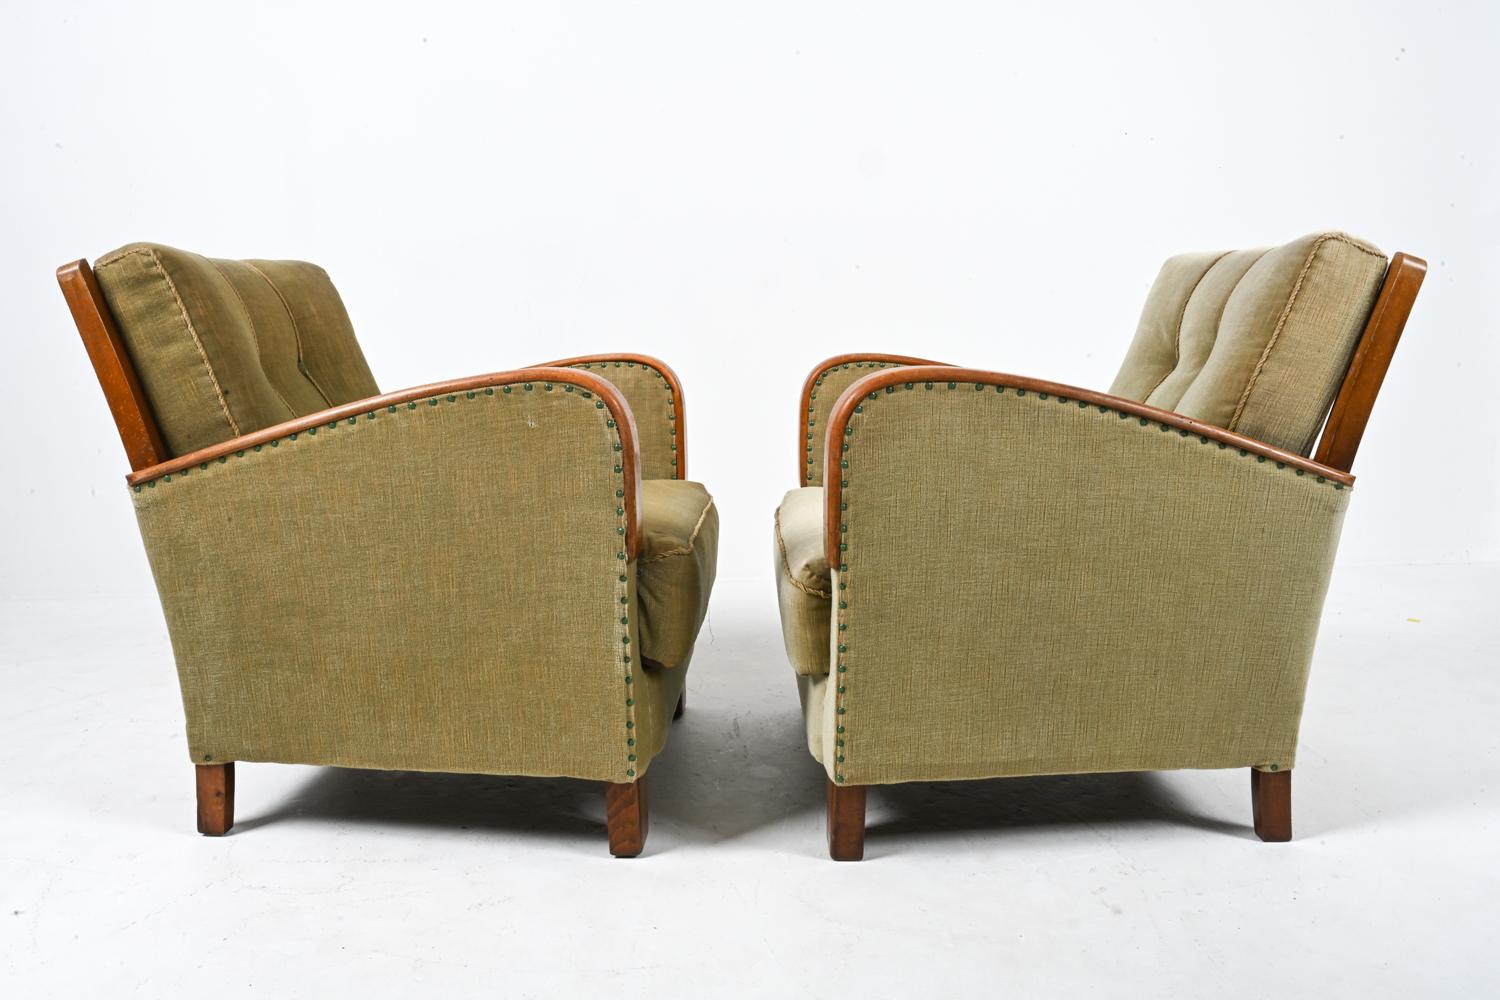 Pair of German Art Deco Oak Easy Chairs, c. 1940's For Sale 5